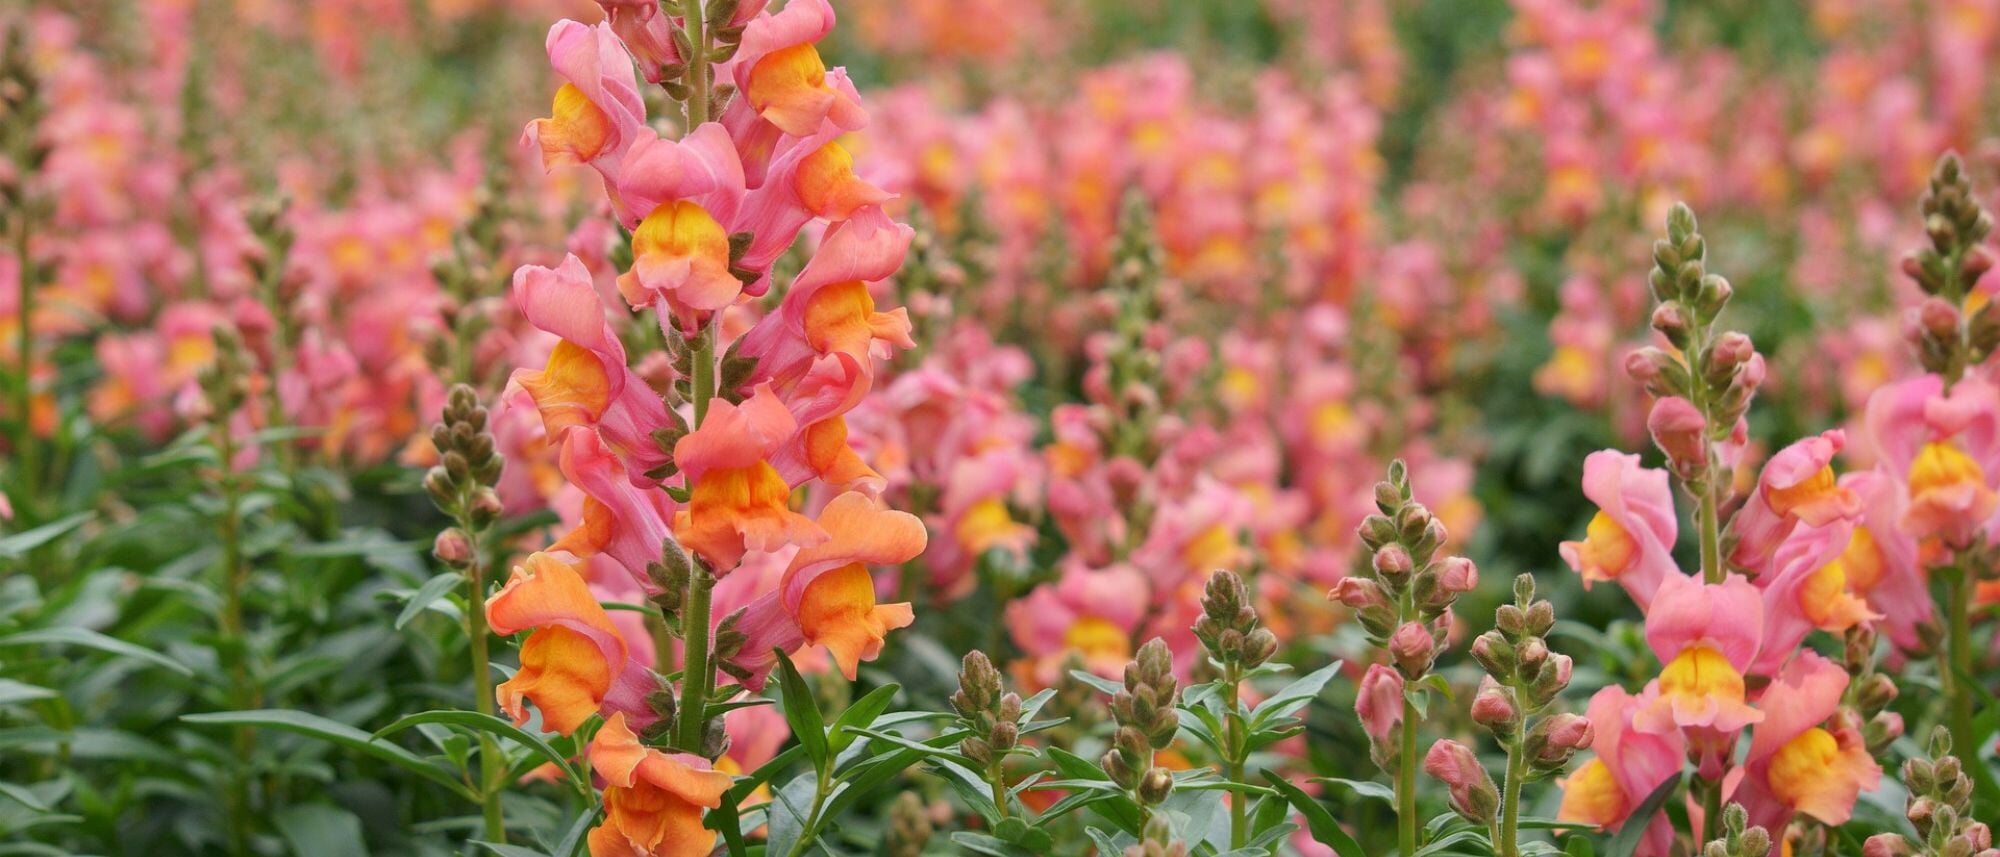 Grow pretty and yummy smelling snapdragons at home